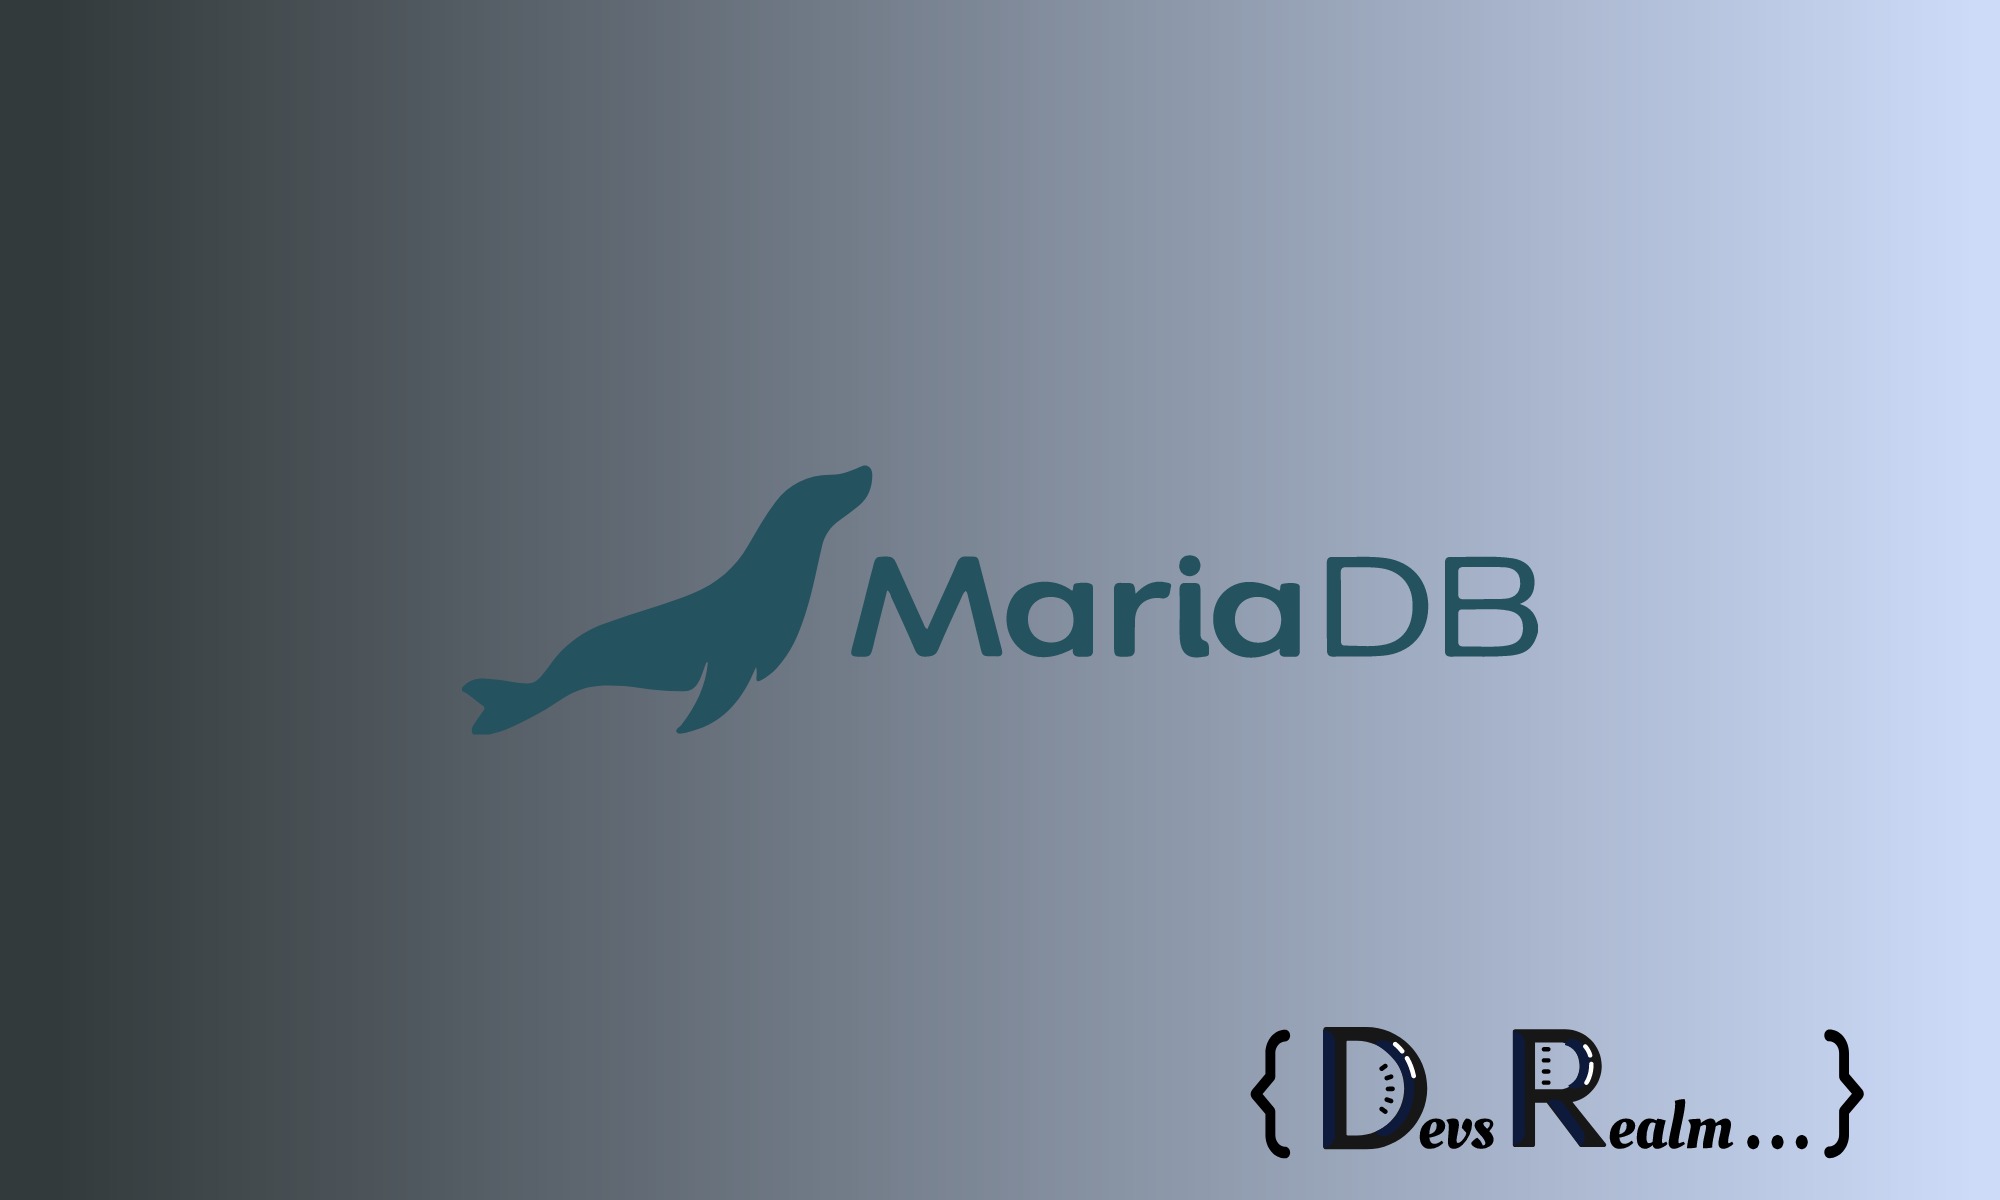 Changing the MariaDb Configuration Files